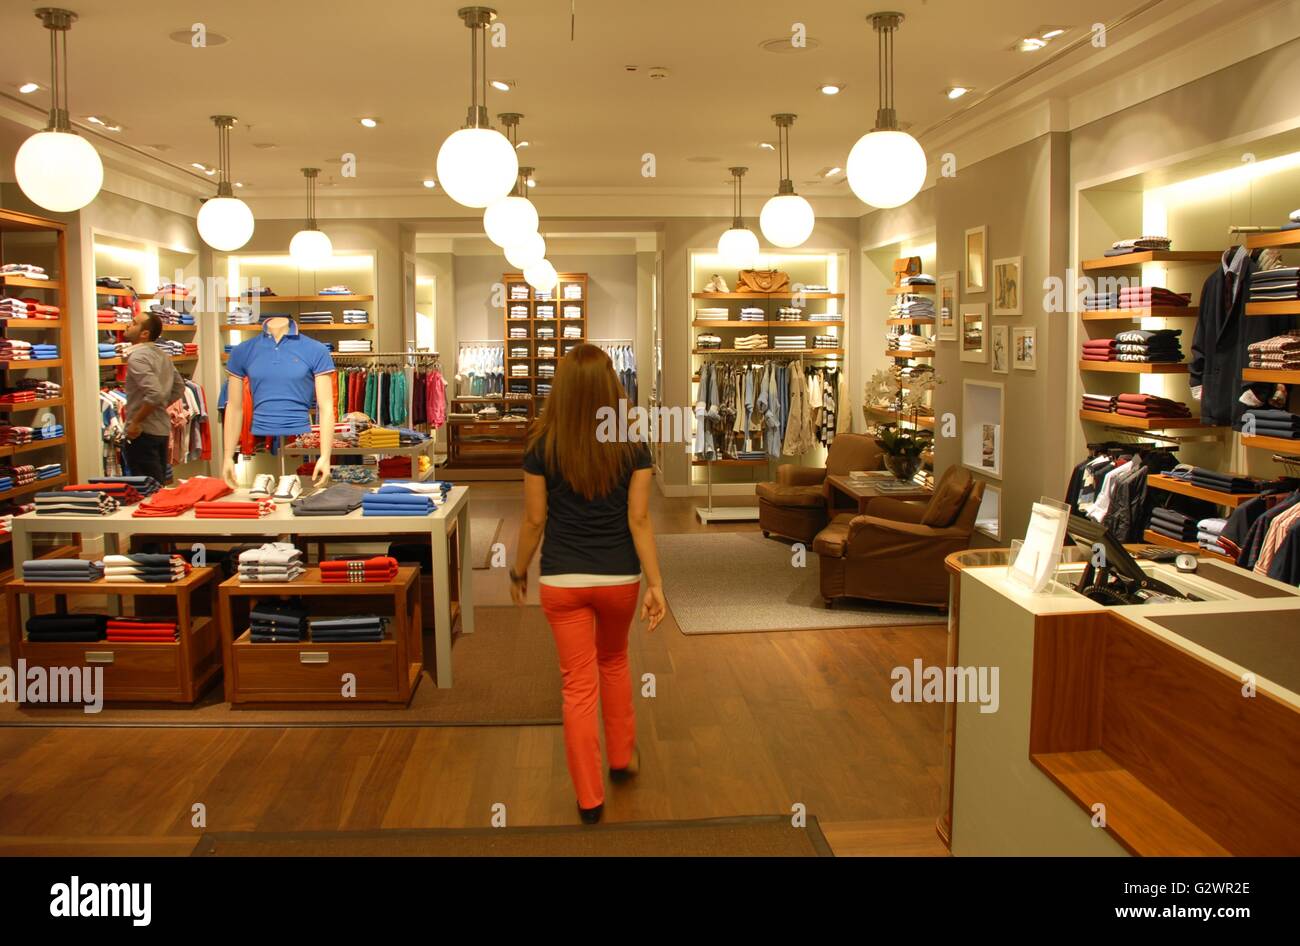 Gant shop at the Panora AVM shopping mall Stock Photo